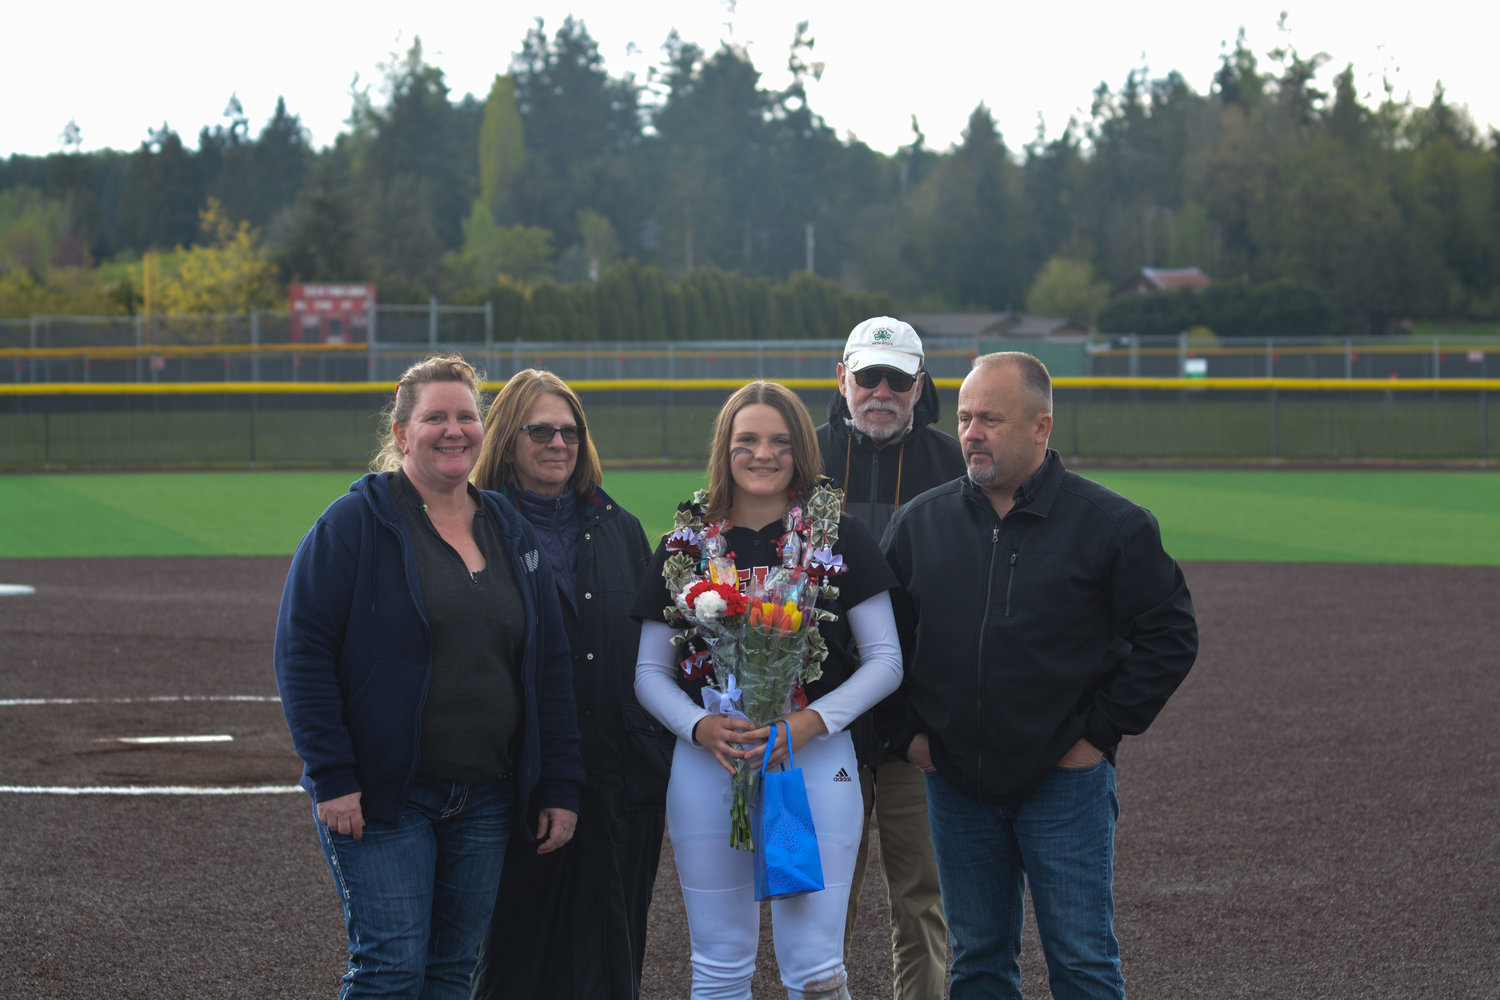 Senior outfielder Katelyn Cederburg poses with her family after the senior night game on May 9.